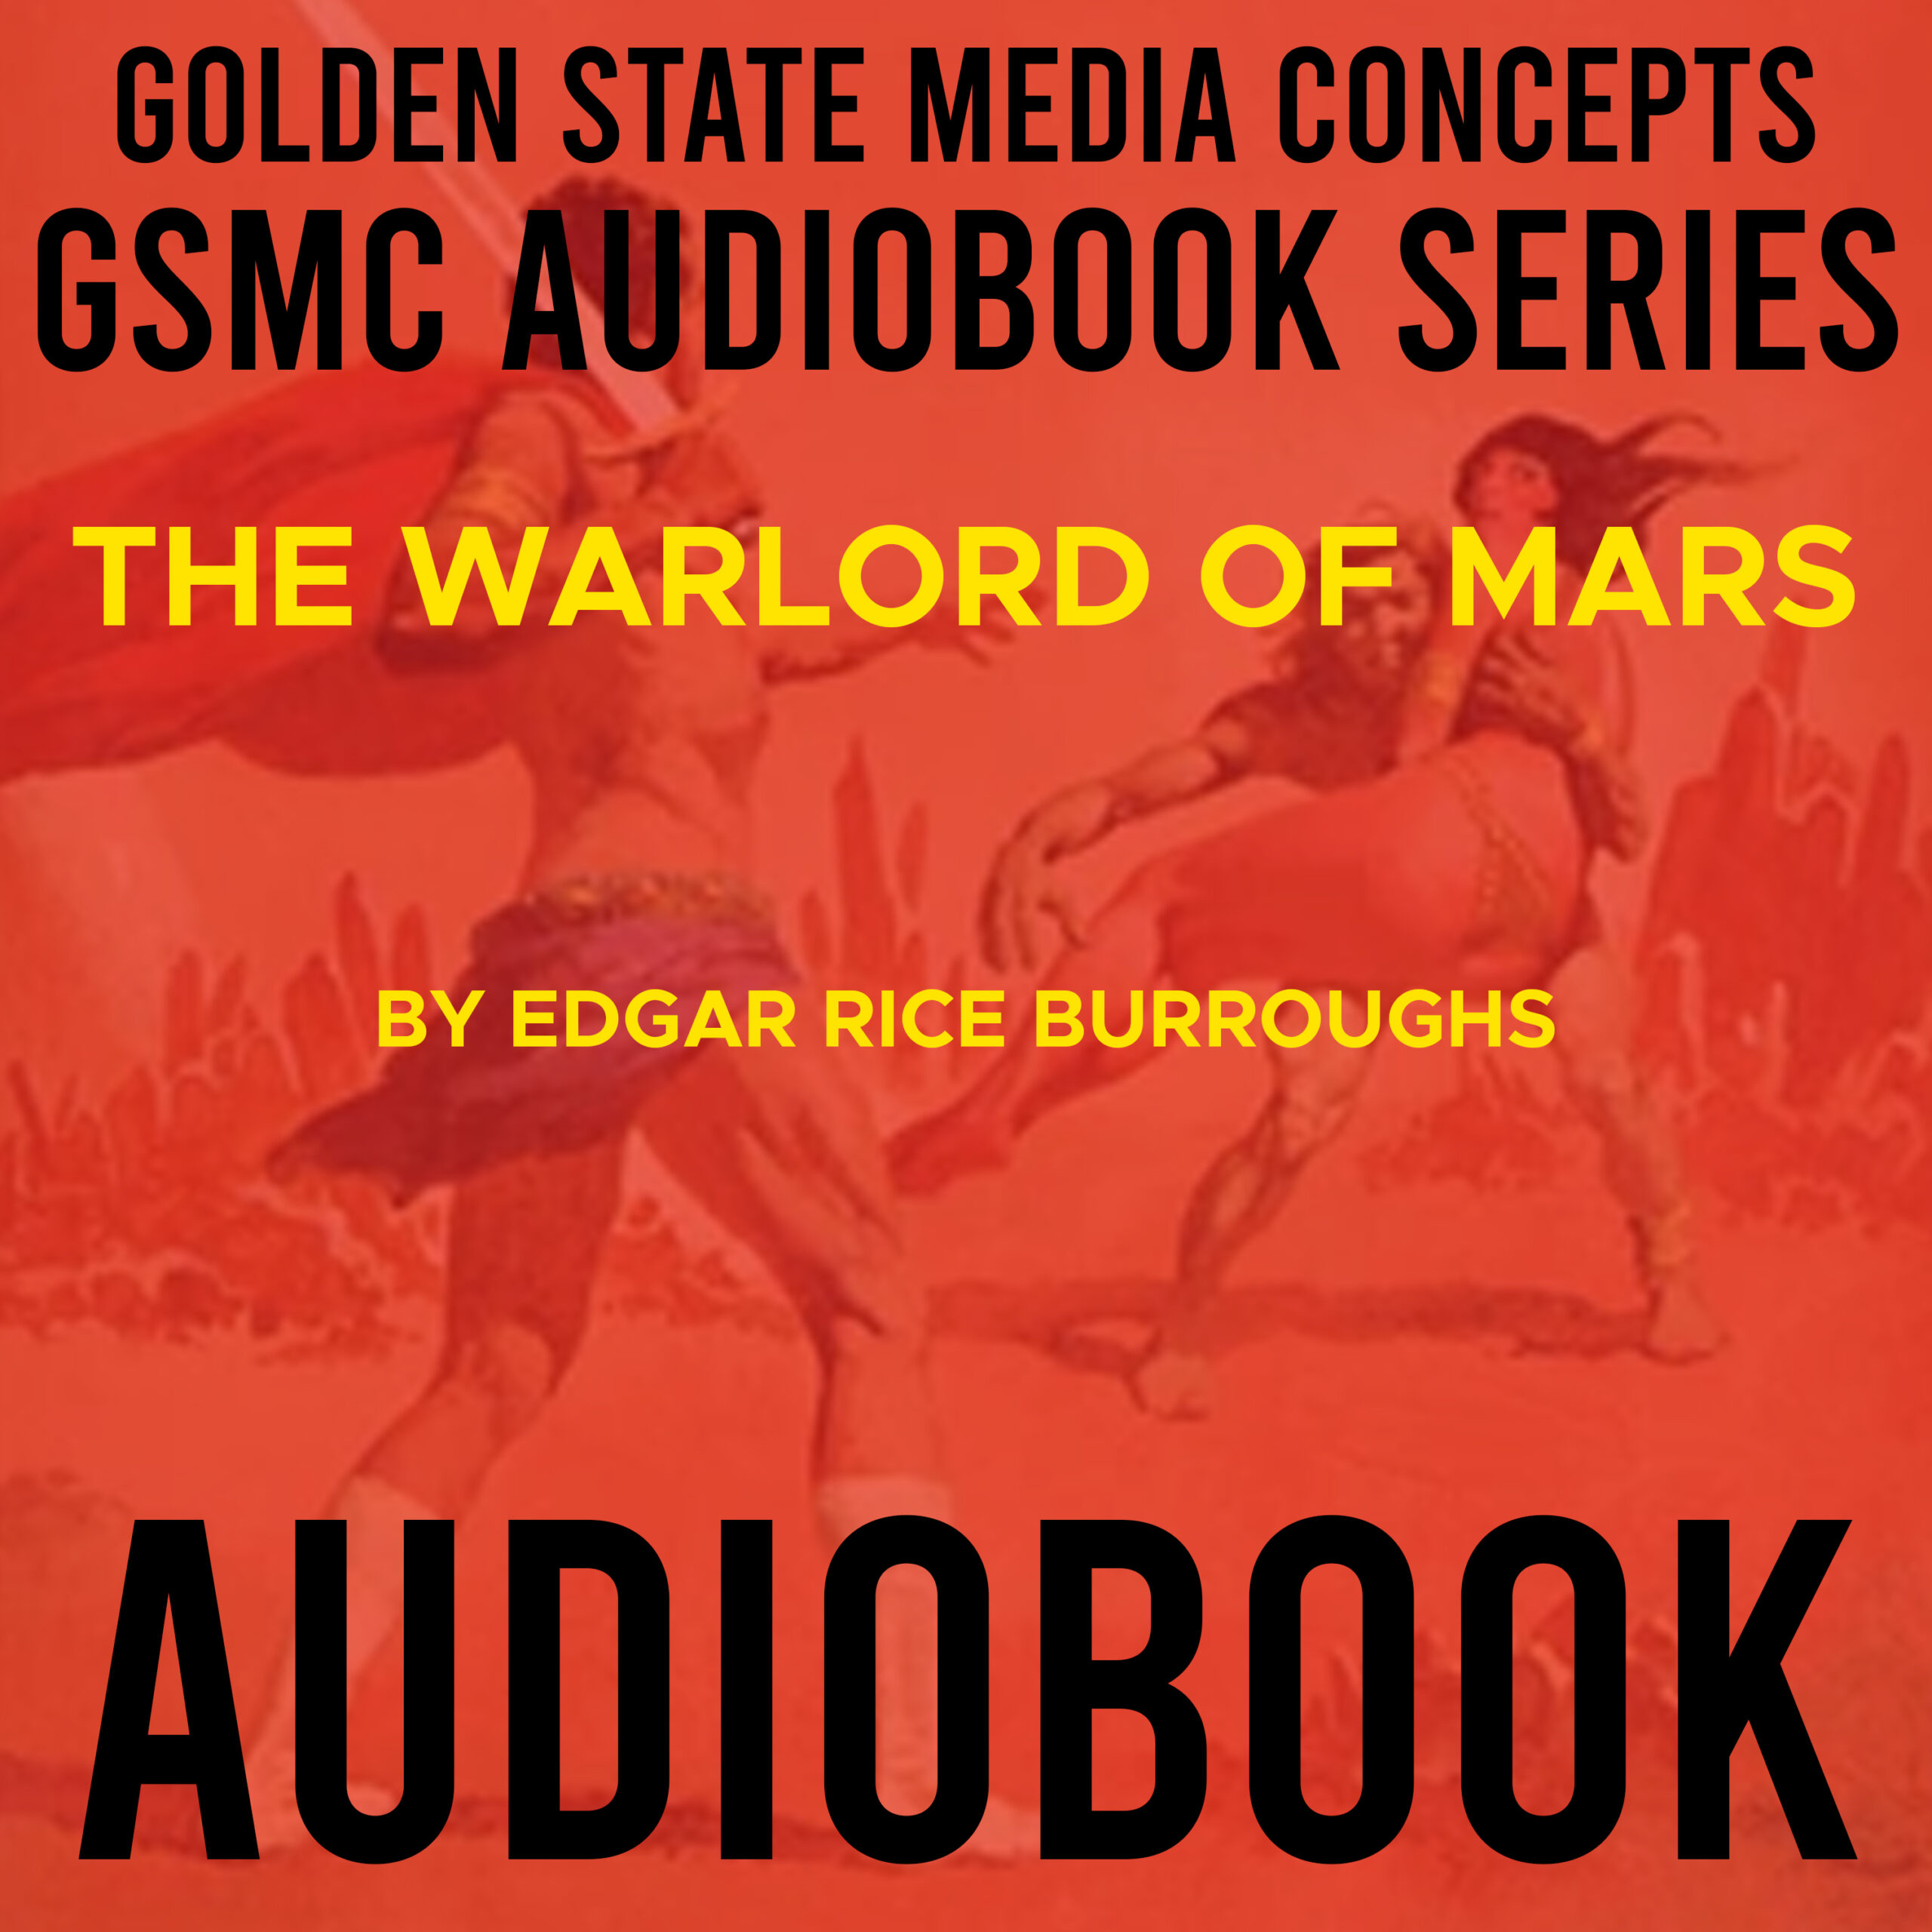 GSMC Audiobook Series: The Warlord of Mars